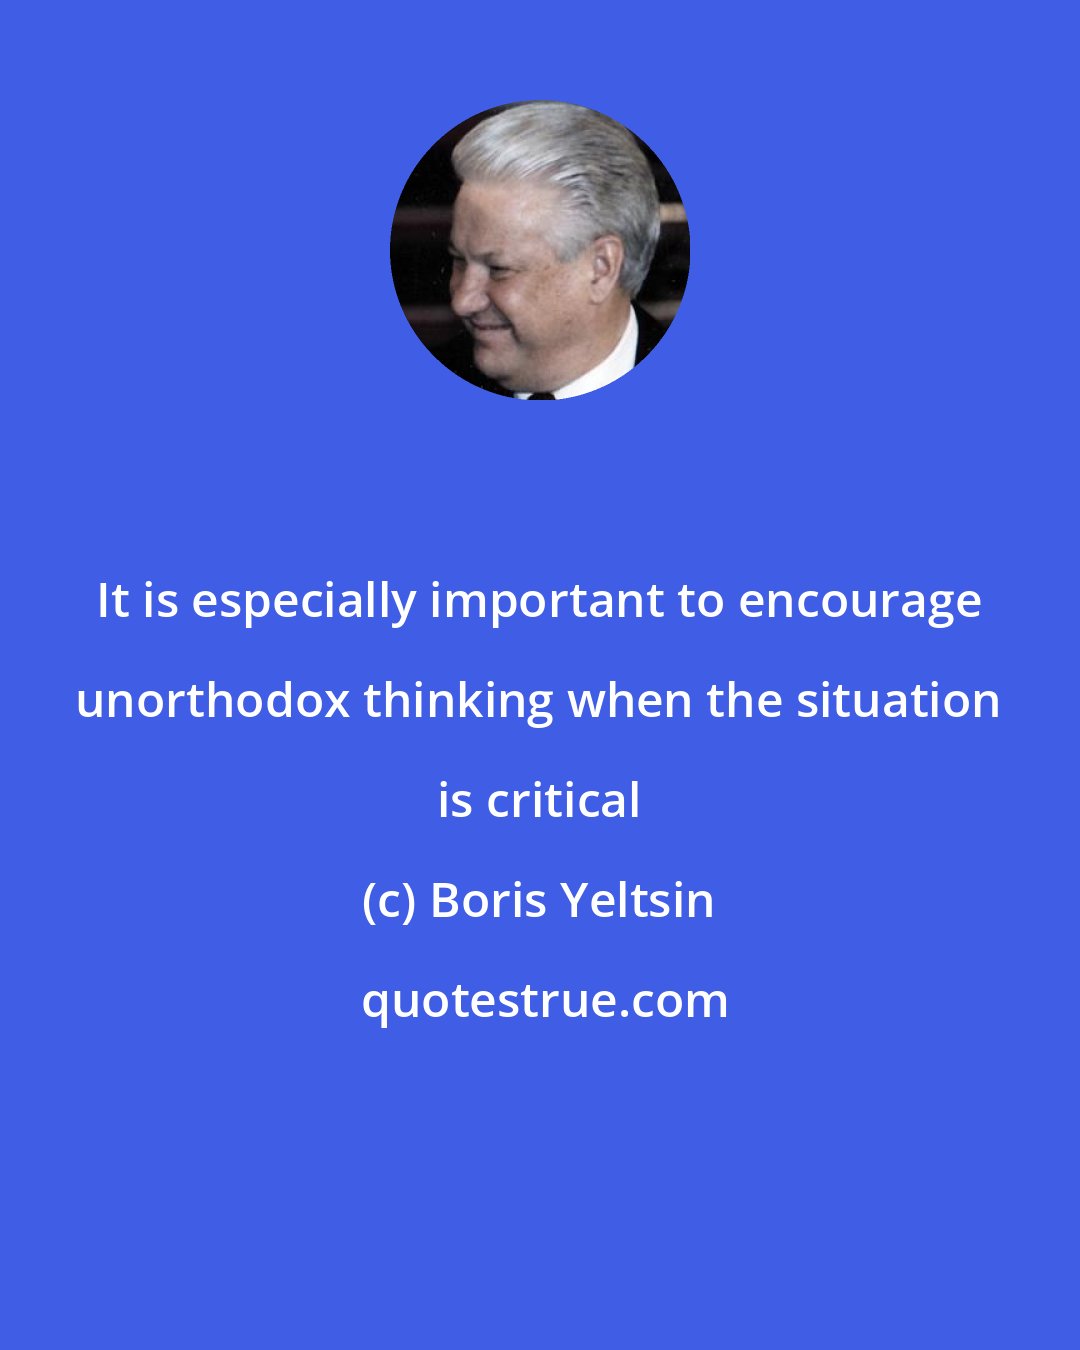 Boris Yeltsin: It is especially important to encourage unorthodox thinking when the situation is critical